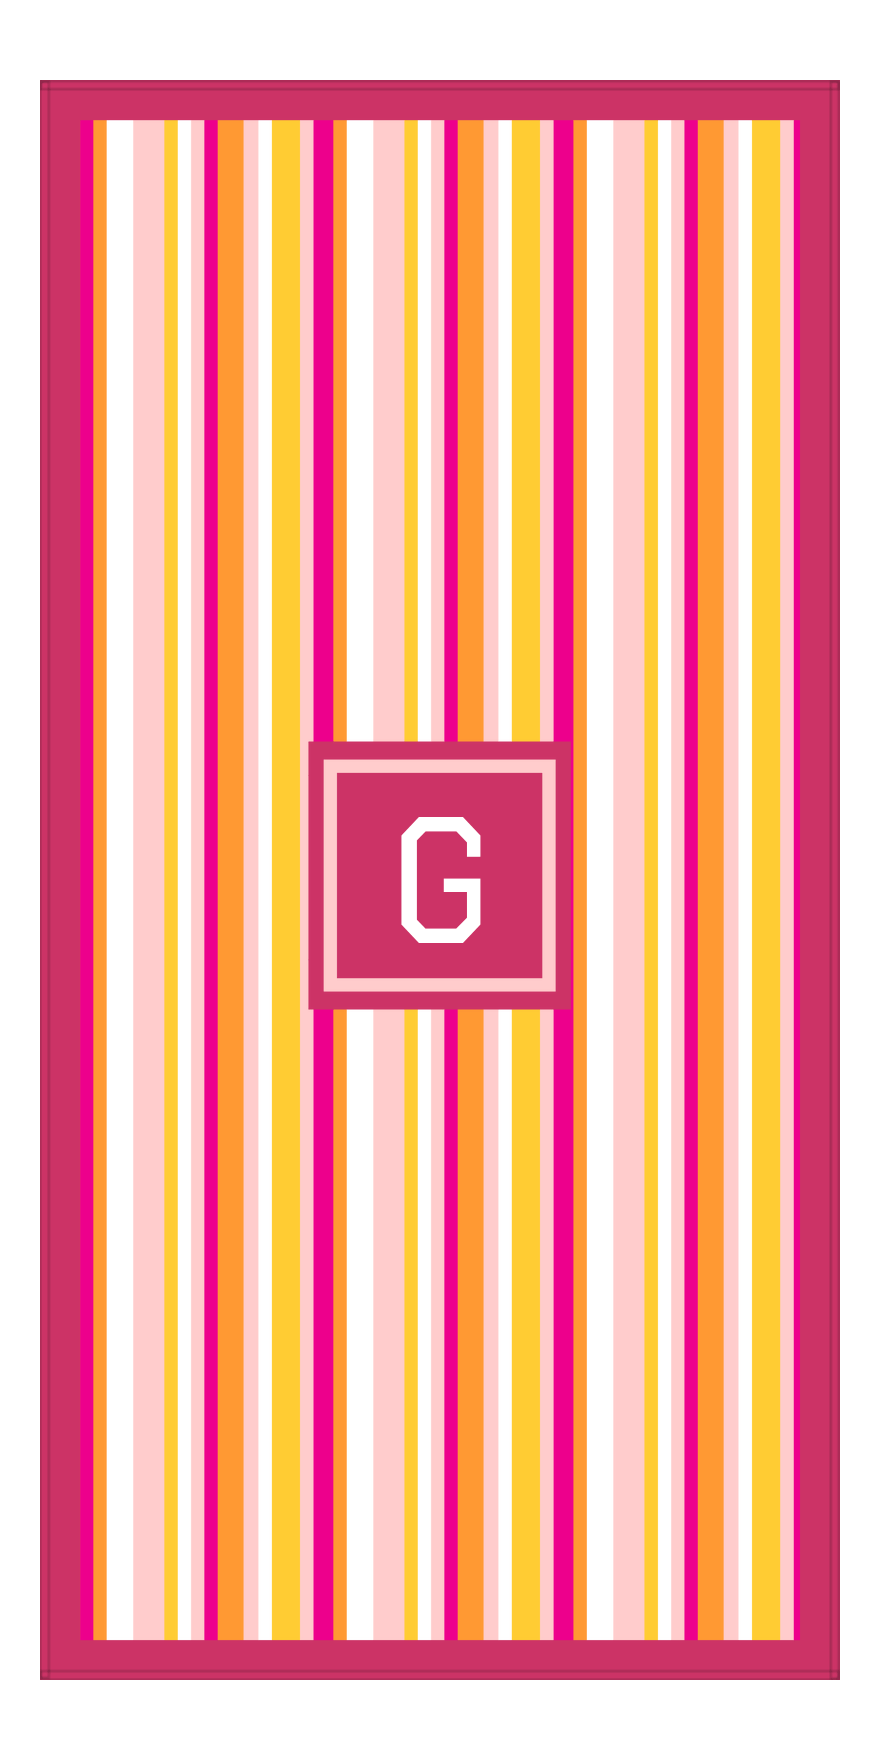 Personalized 5 Color Stripes 3 Repeat Beach Towel - Vertical - Pink and Orange - Square Frame - Front View